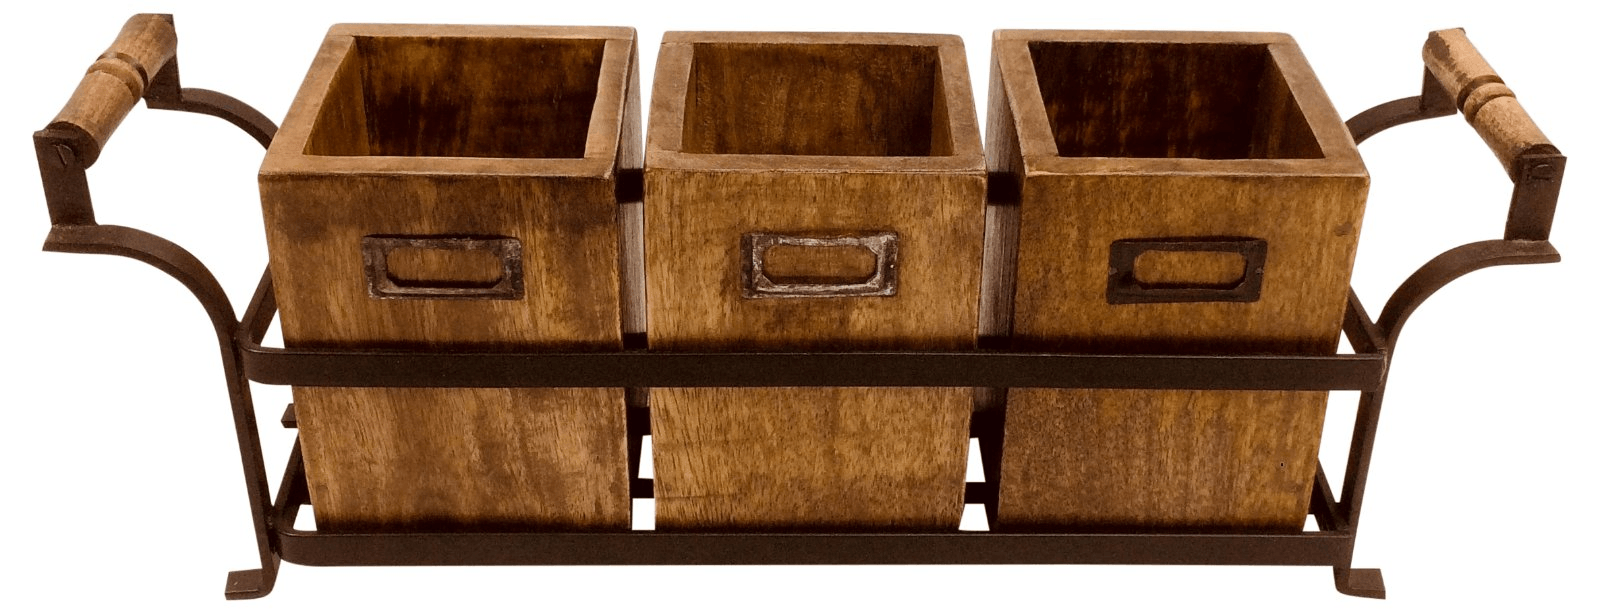 Metal Stand with 3 Wooden Boxes - Lost Land Interiors